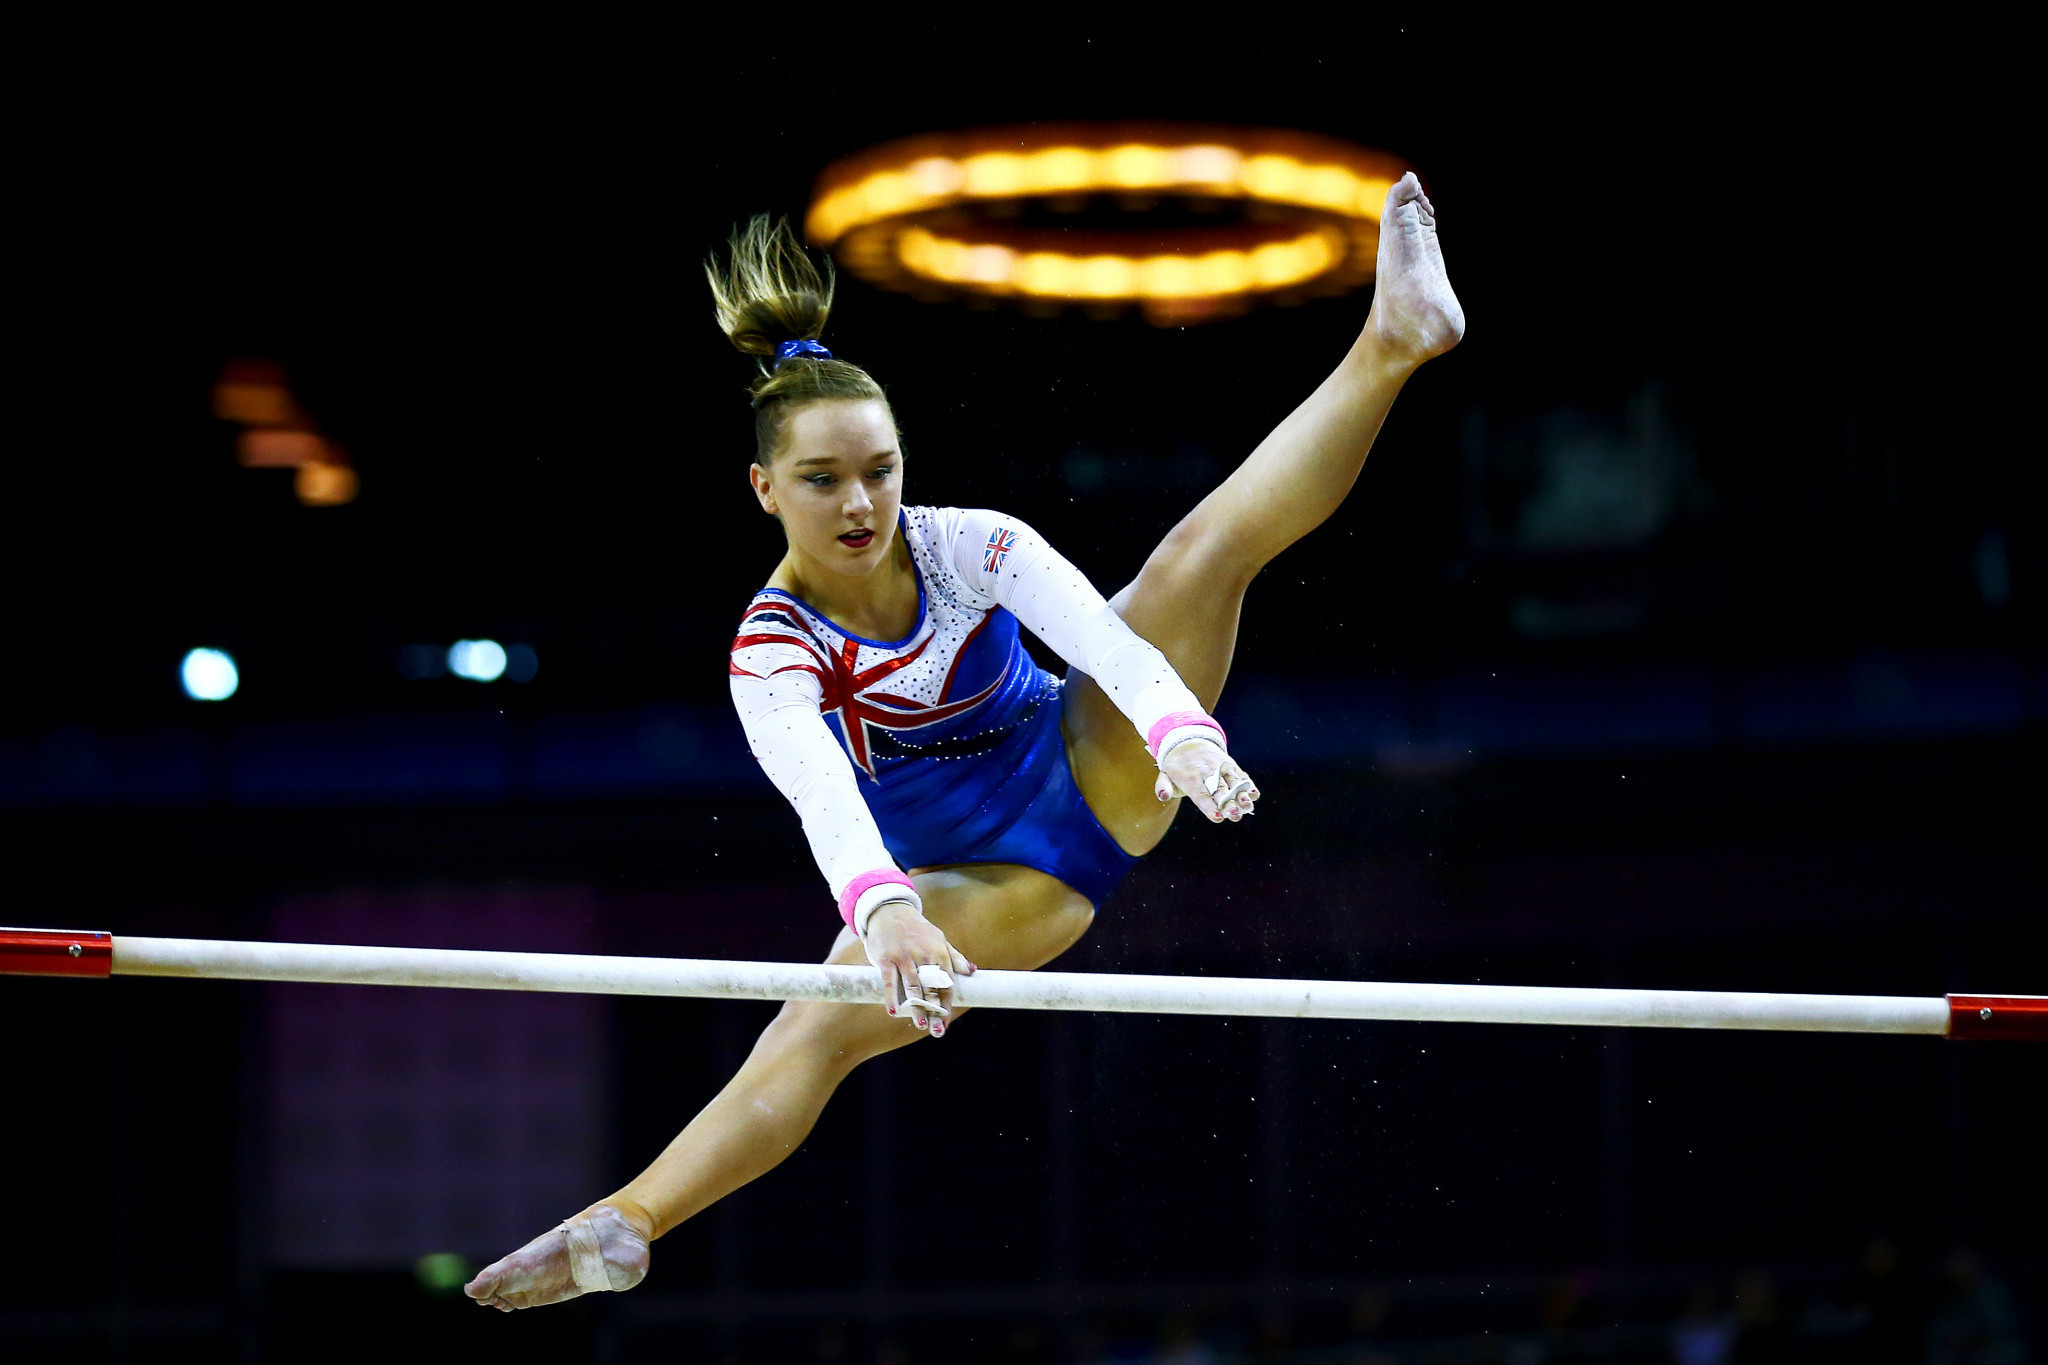 Olympic gymnastics medallist Amy Tinkler retired a month after lodging a formal complaint over allegations of abuse in December 2019 ©Getty Images